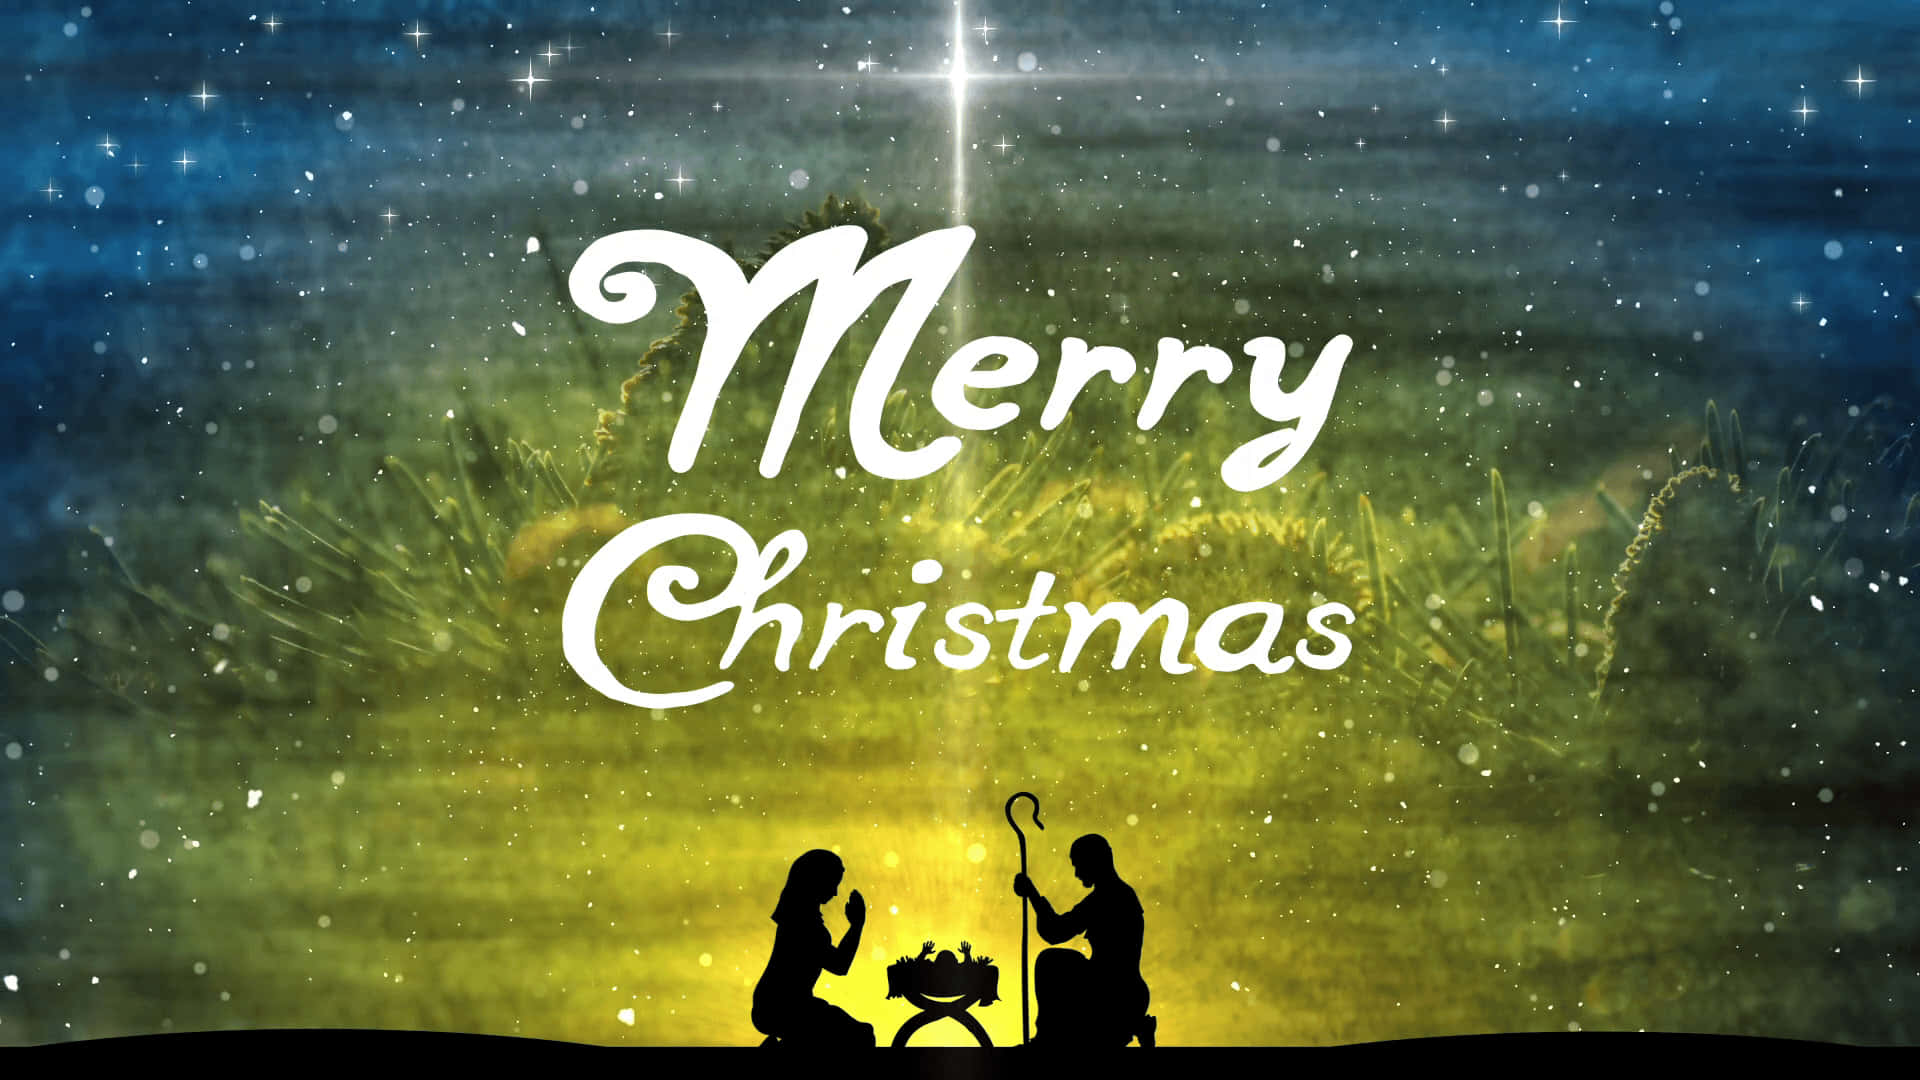 Download Christmas Nativity Merry Greeting Wallpaper